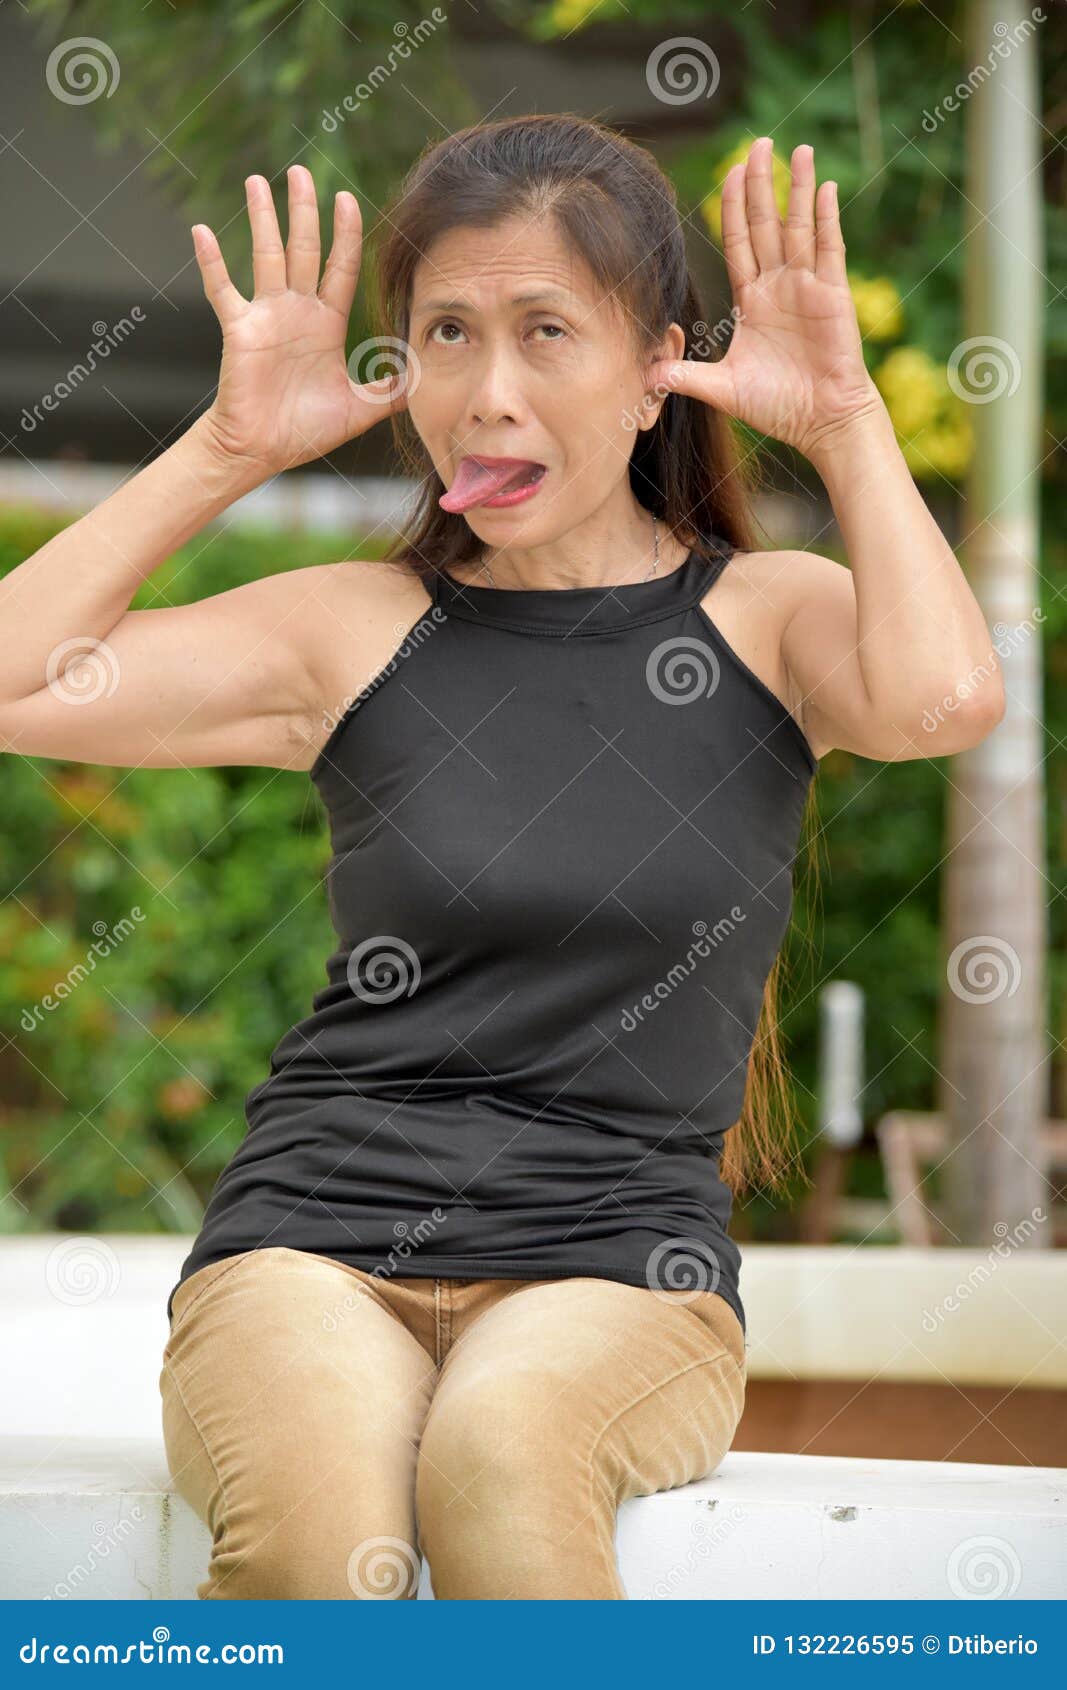 Filipina Adult Female Making Funny Faces Stock Image picture picture